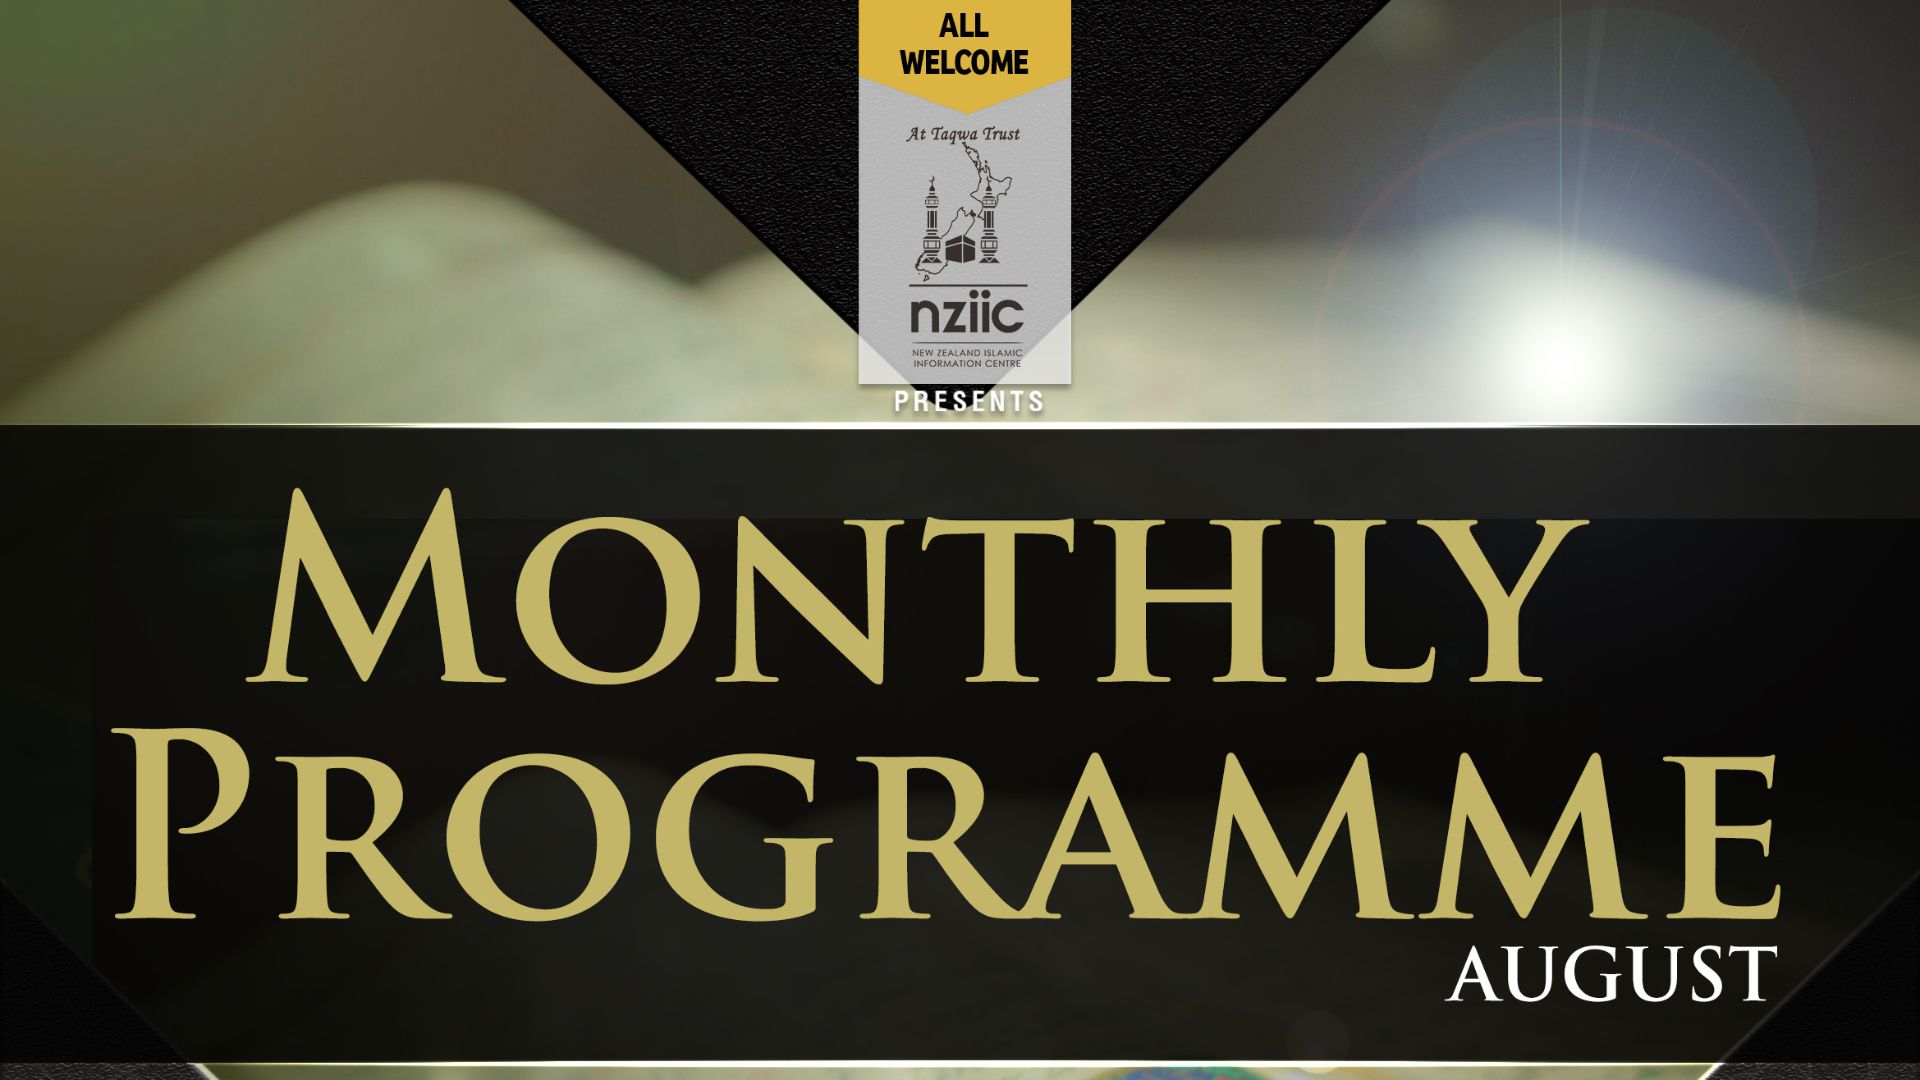 Monthly Programme Featured image